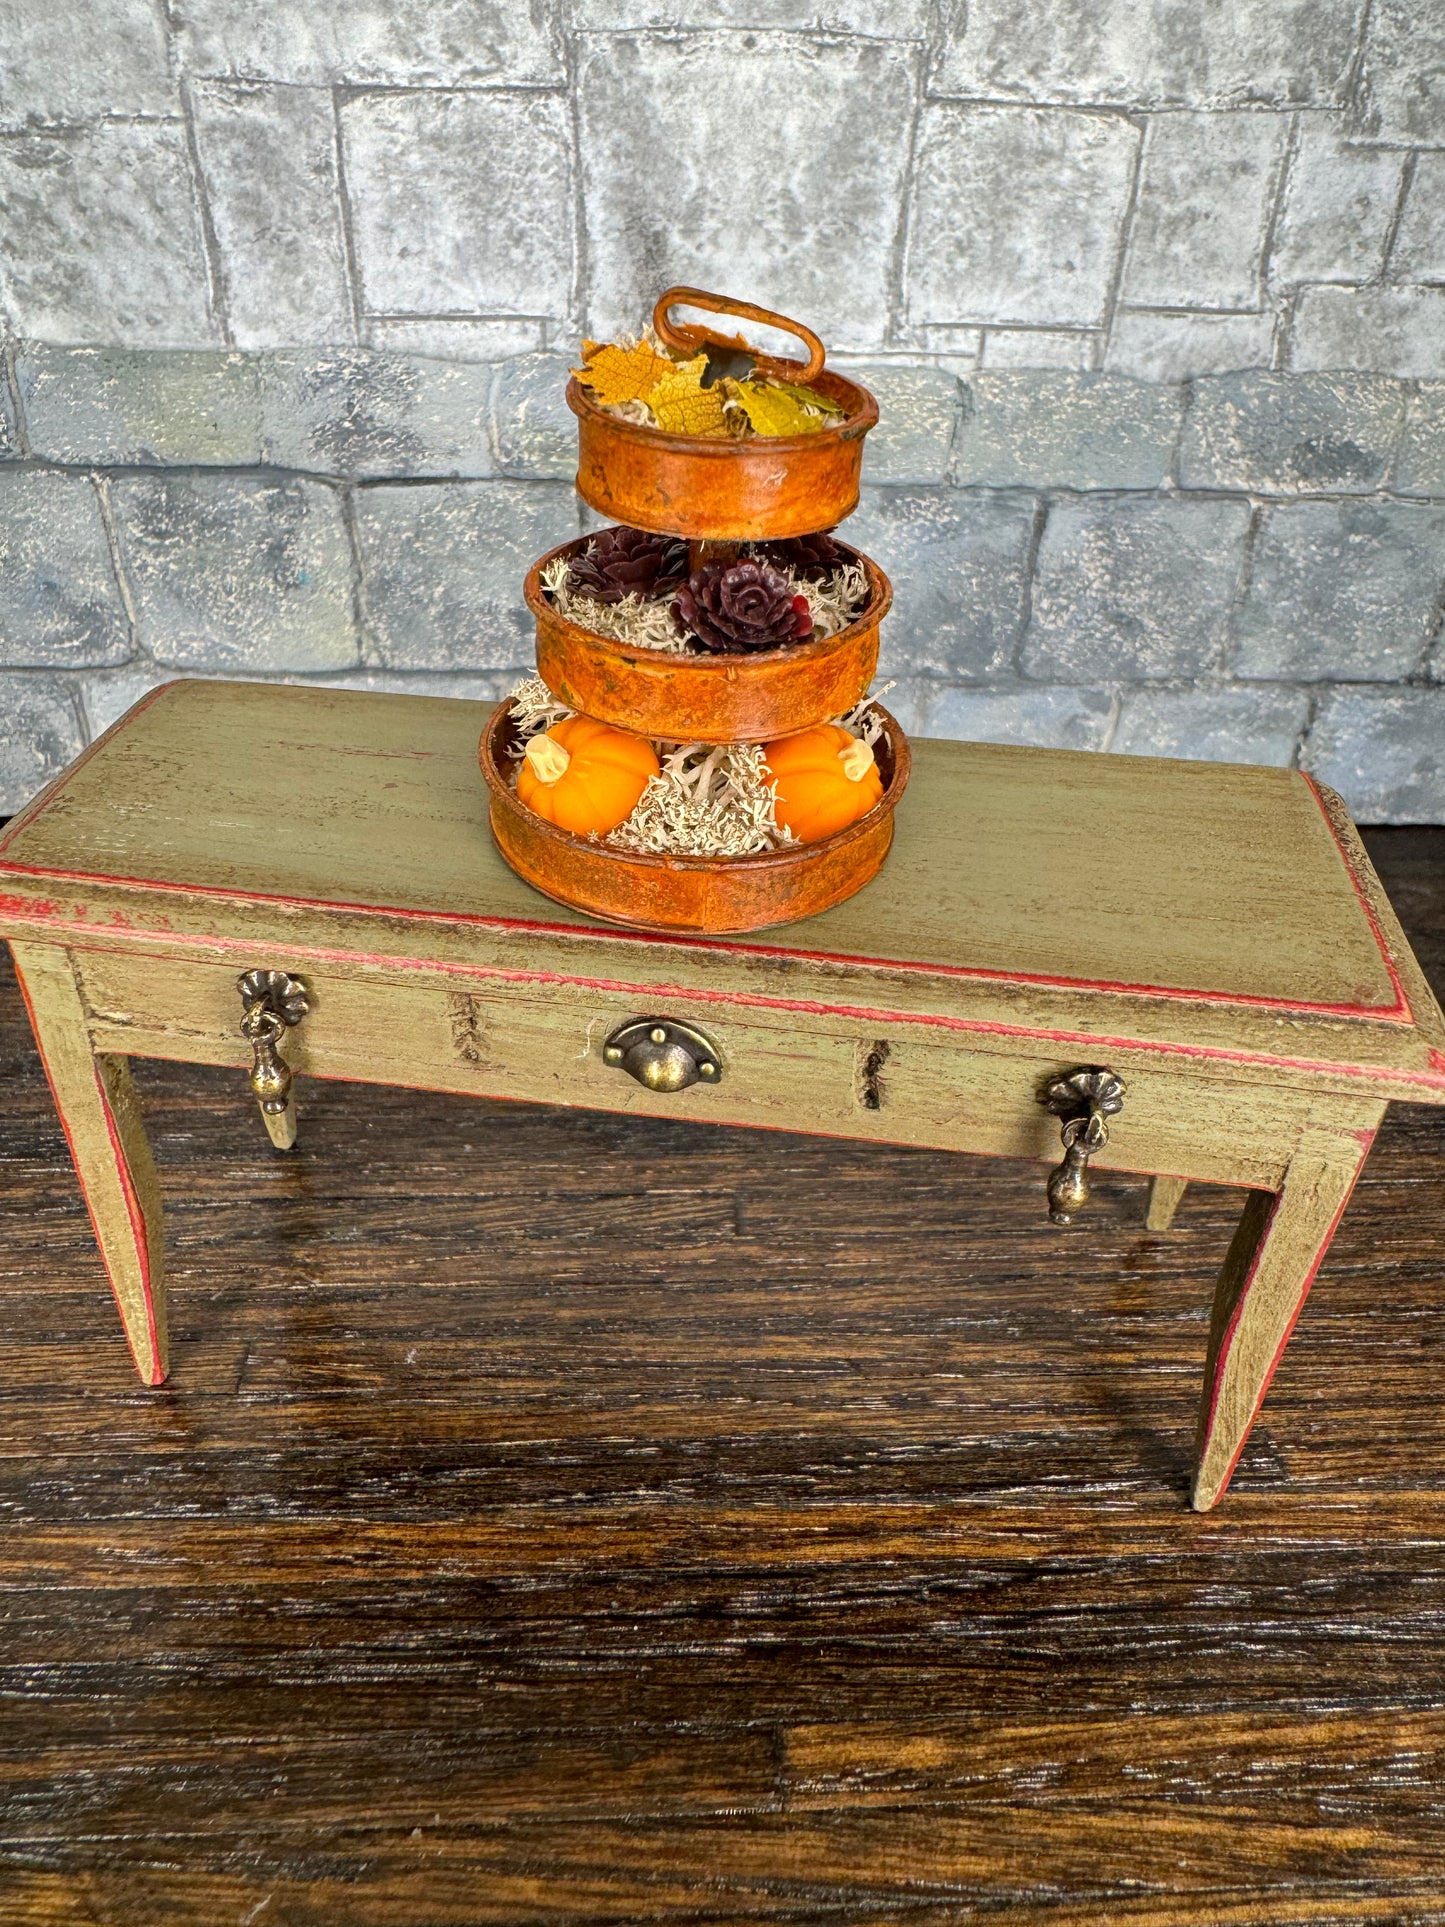 Harvest Decorated 3-Tiered Tray - 1:12 Scale